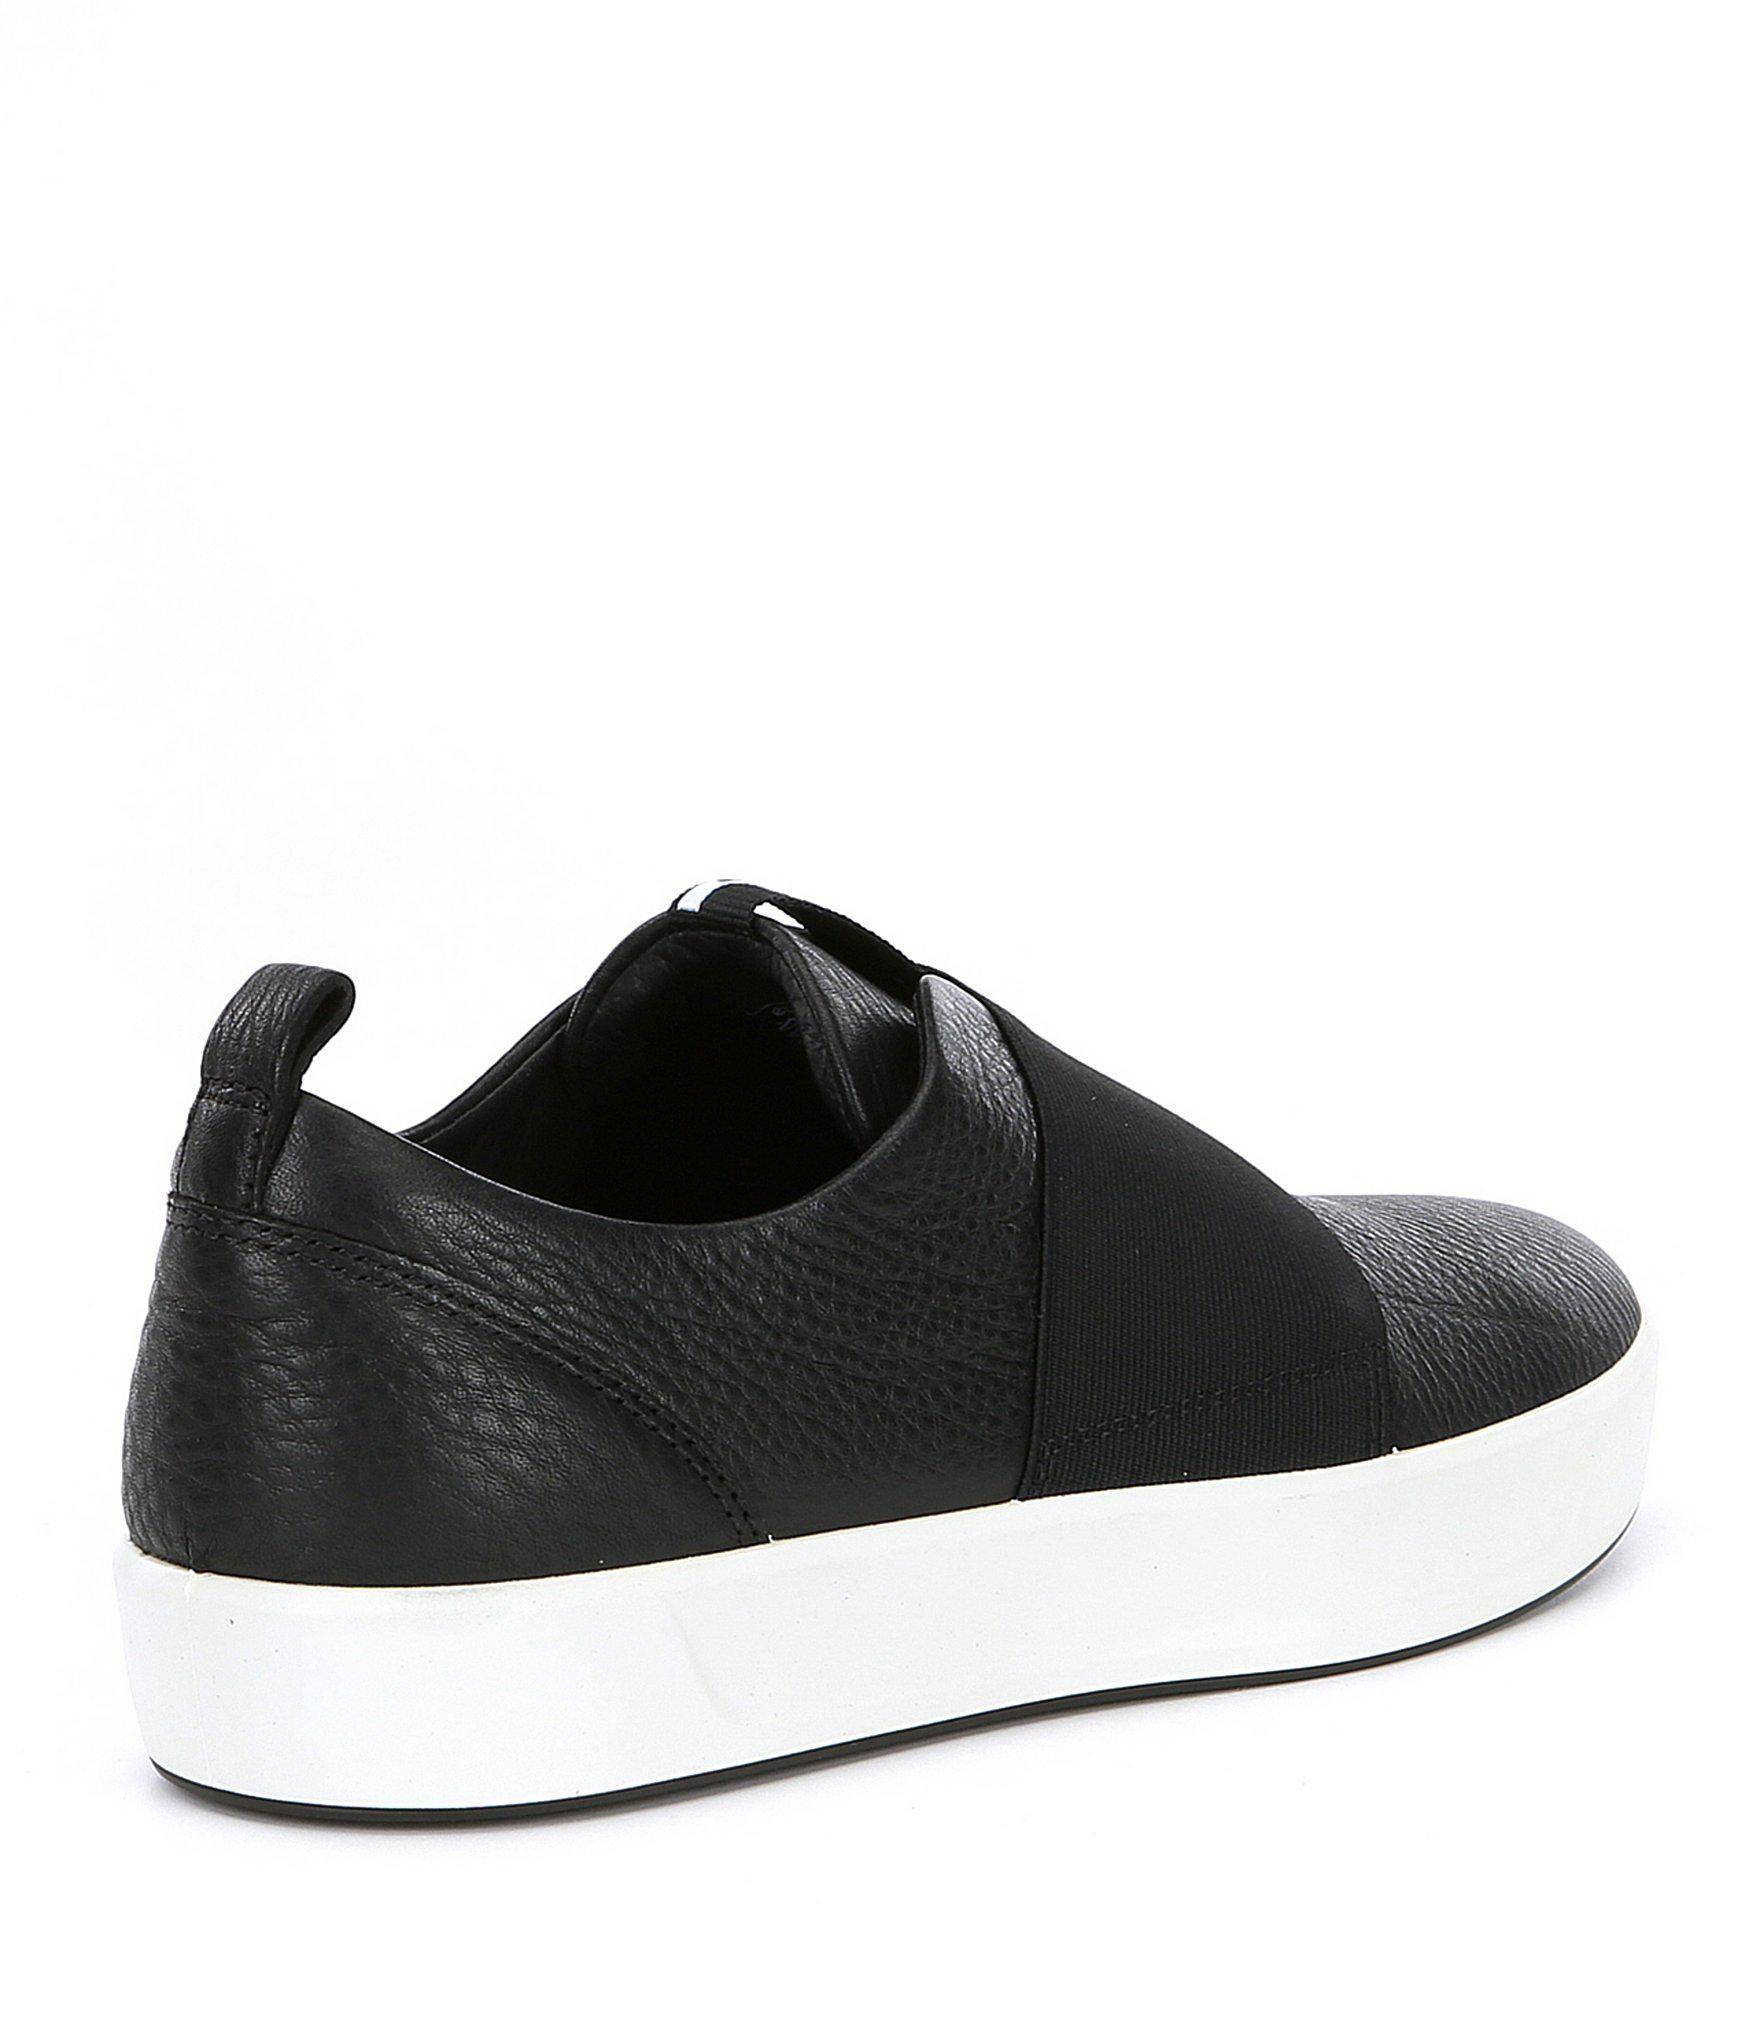 ecco soft 8 band low sneaker